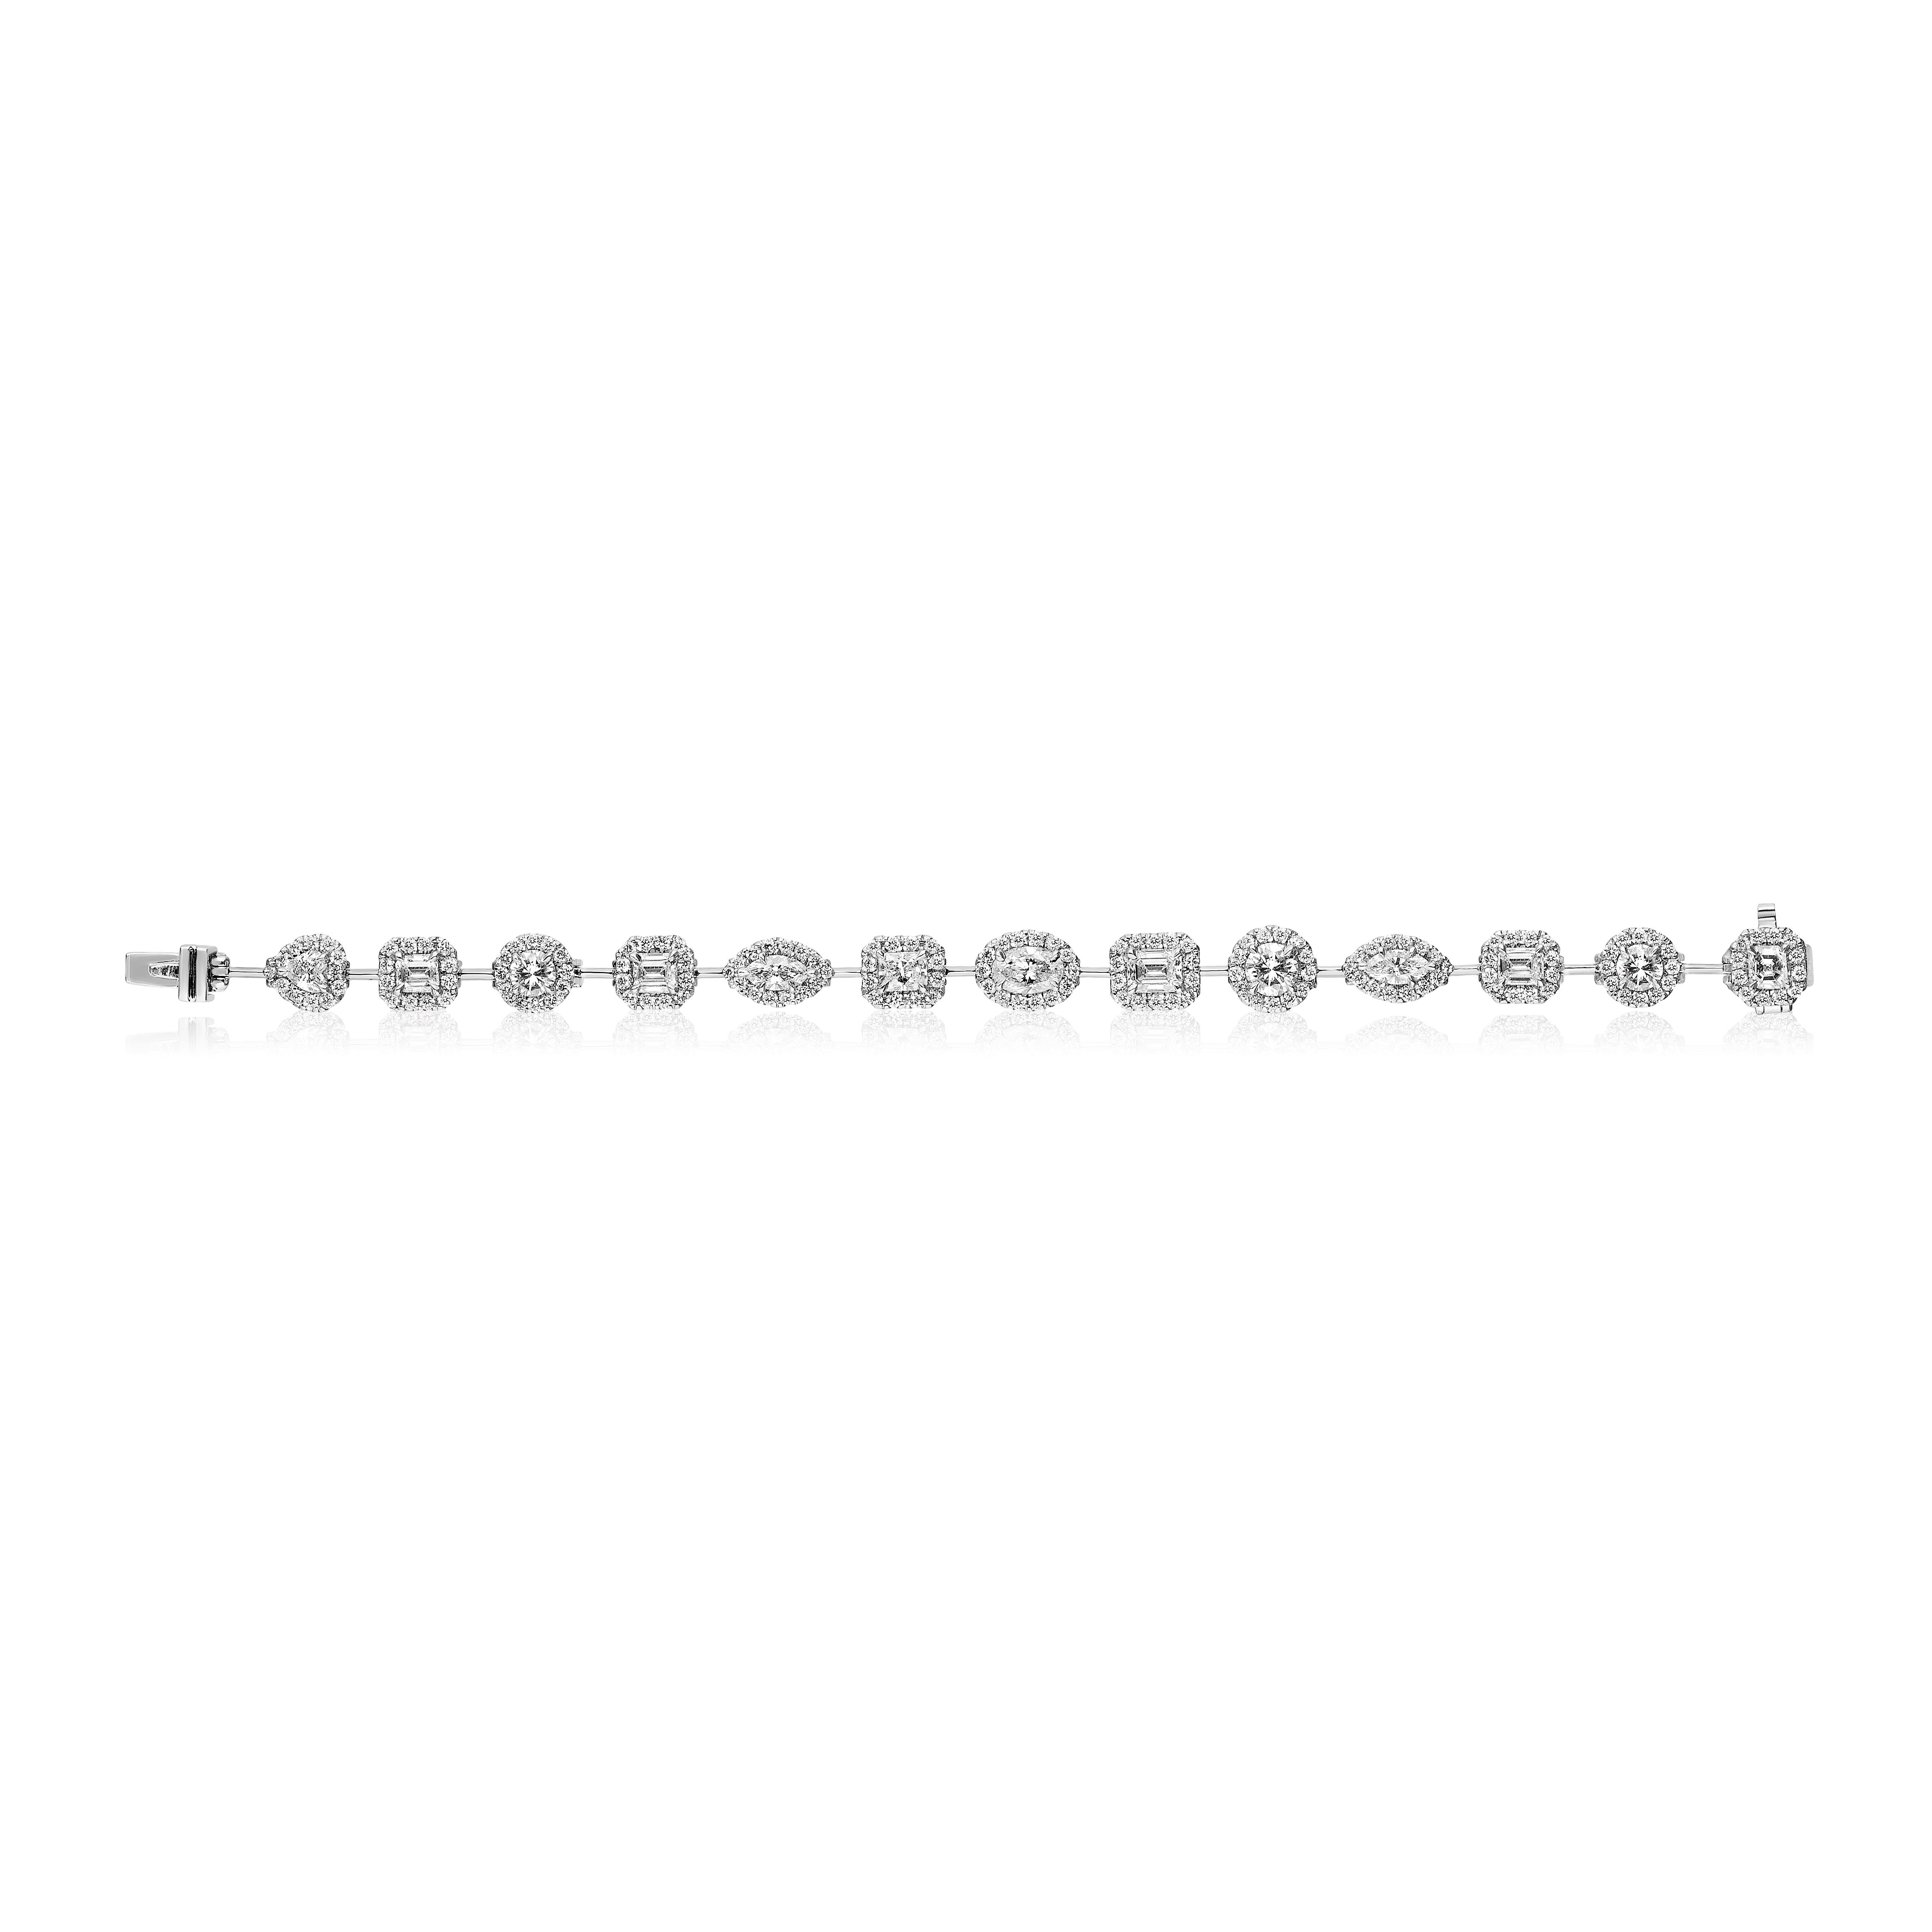 13 Multi Shaped Diamond Set each surrounded with a Row of Round Brilliant Diamonds.
Approximately 8.50 Carats Total.
Set in Platinum.
Measures 6.5 Inches.